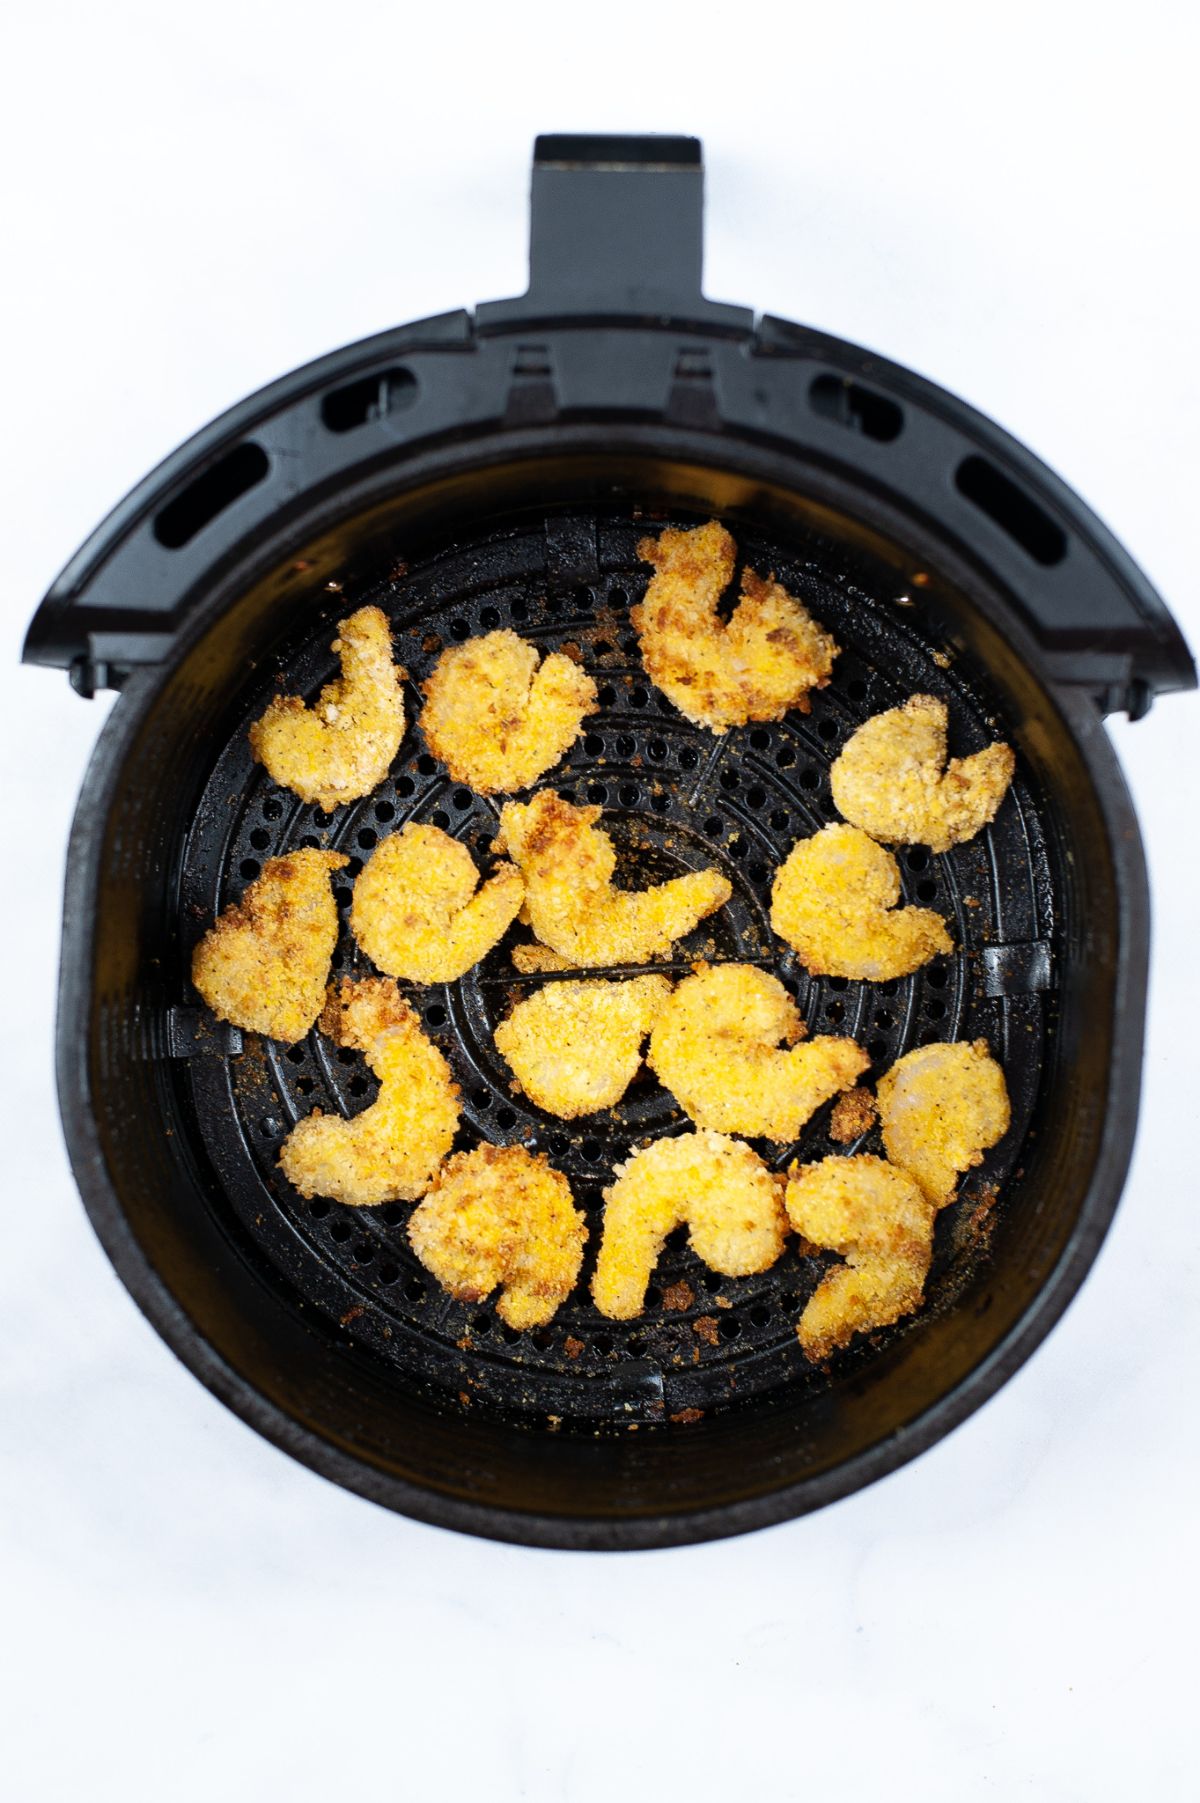 Cooked shrimp in an air fryer basket.